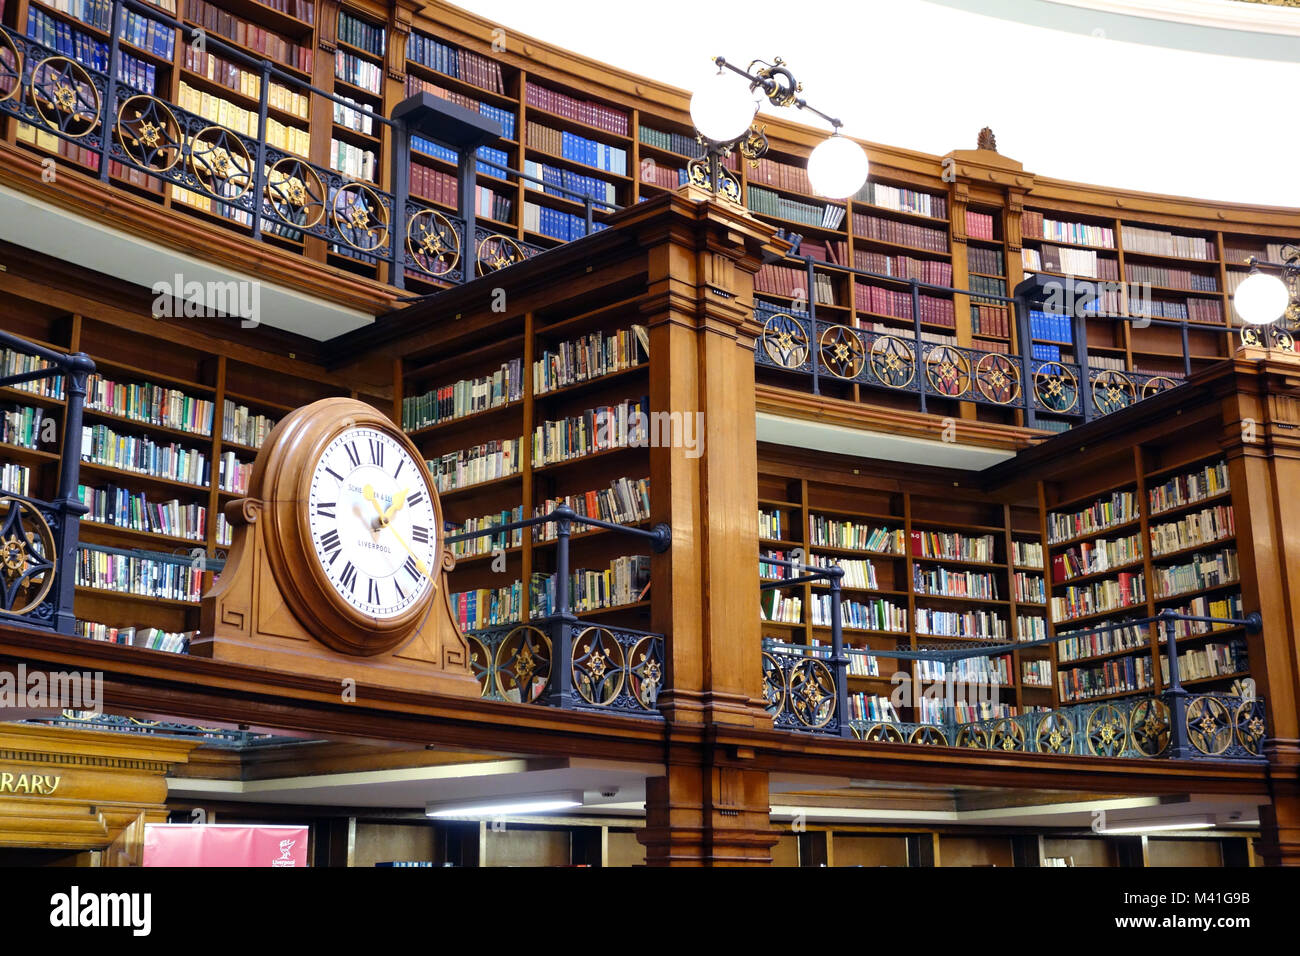 The Circular Wooden Book Shelves in the Picton Reading Room in Liverpool Central Library.  Curved, Curving Stock Photo